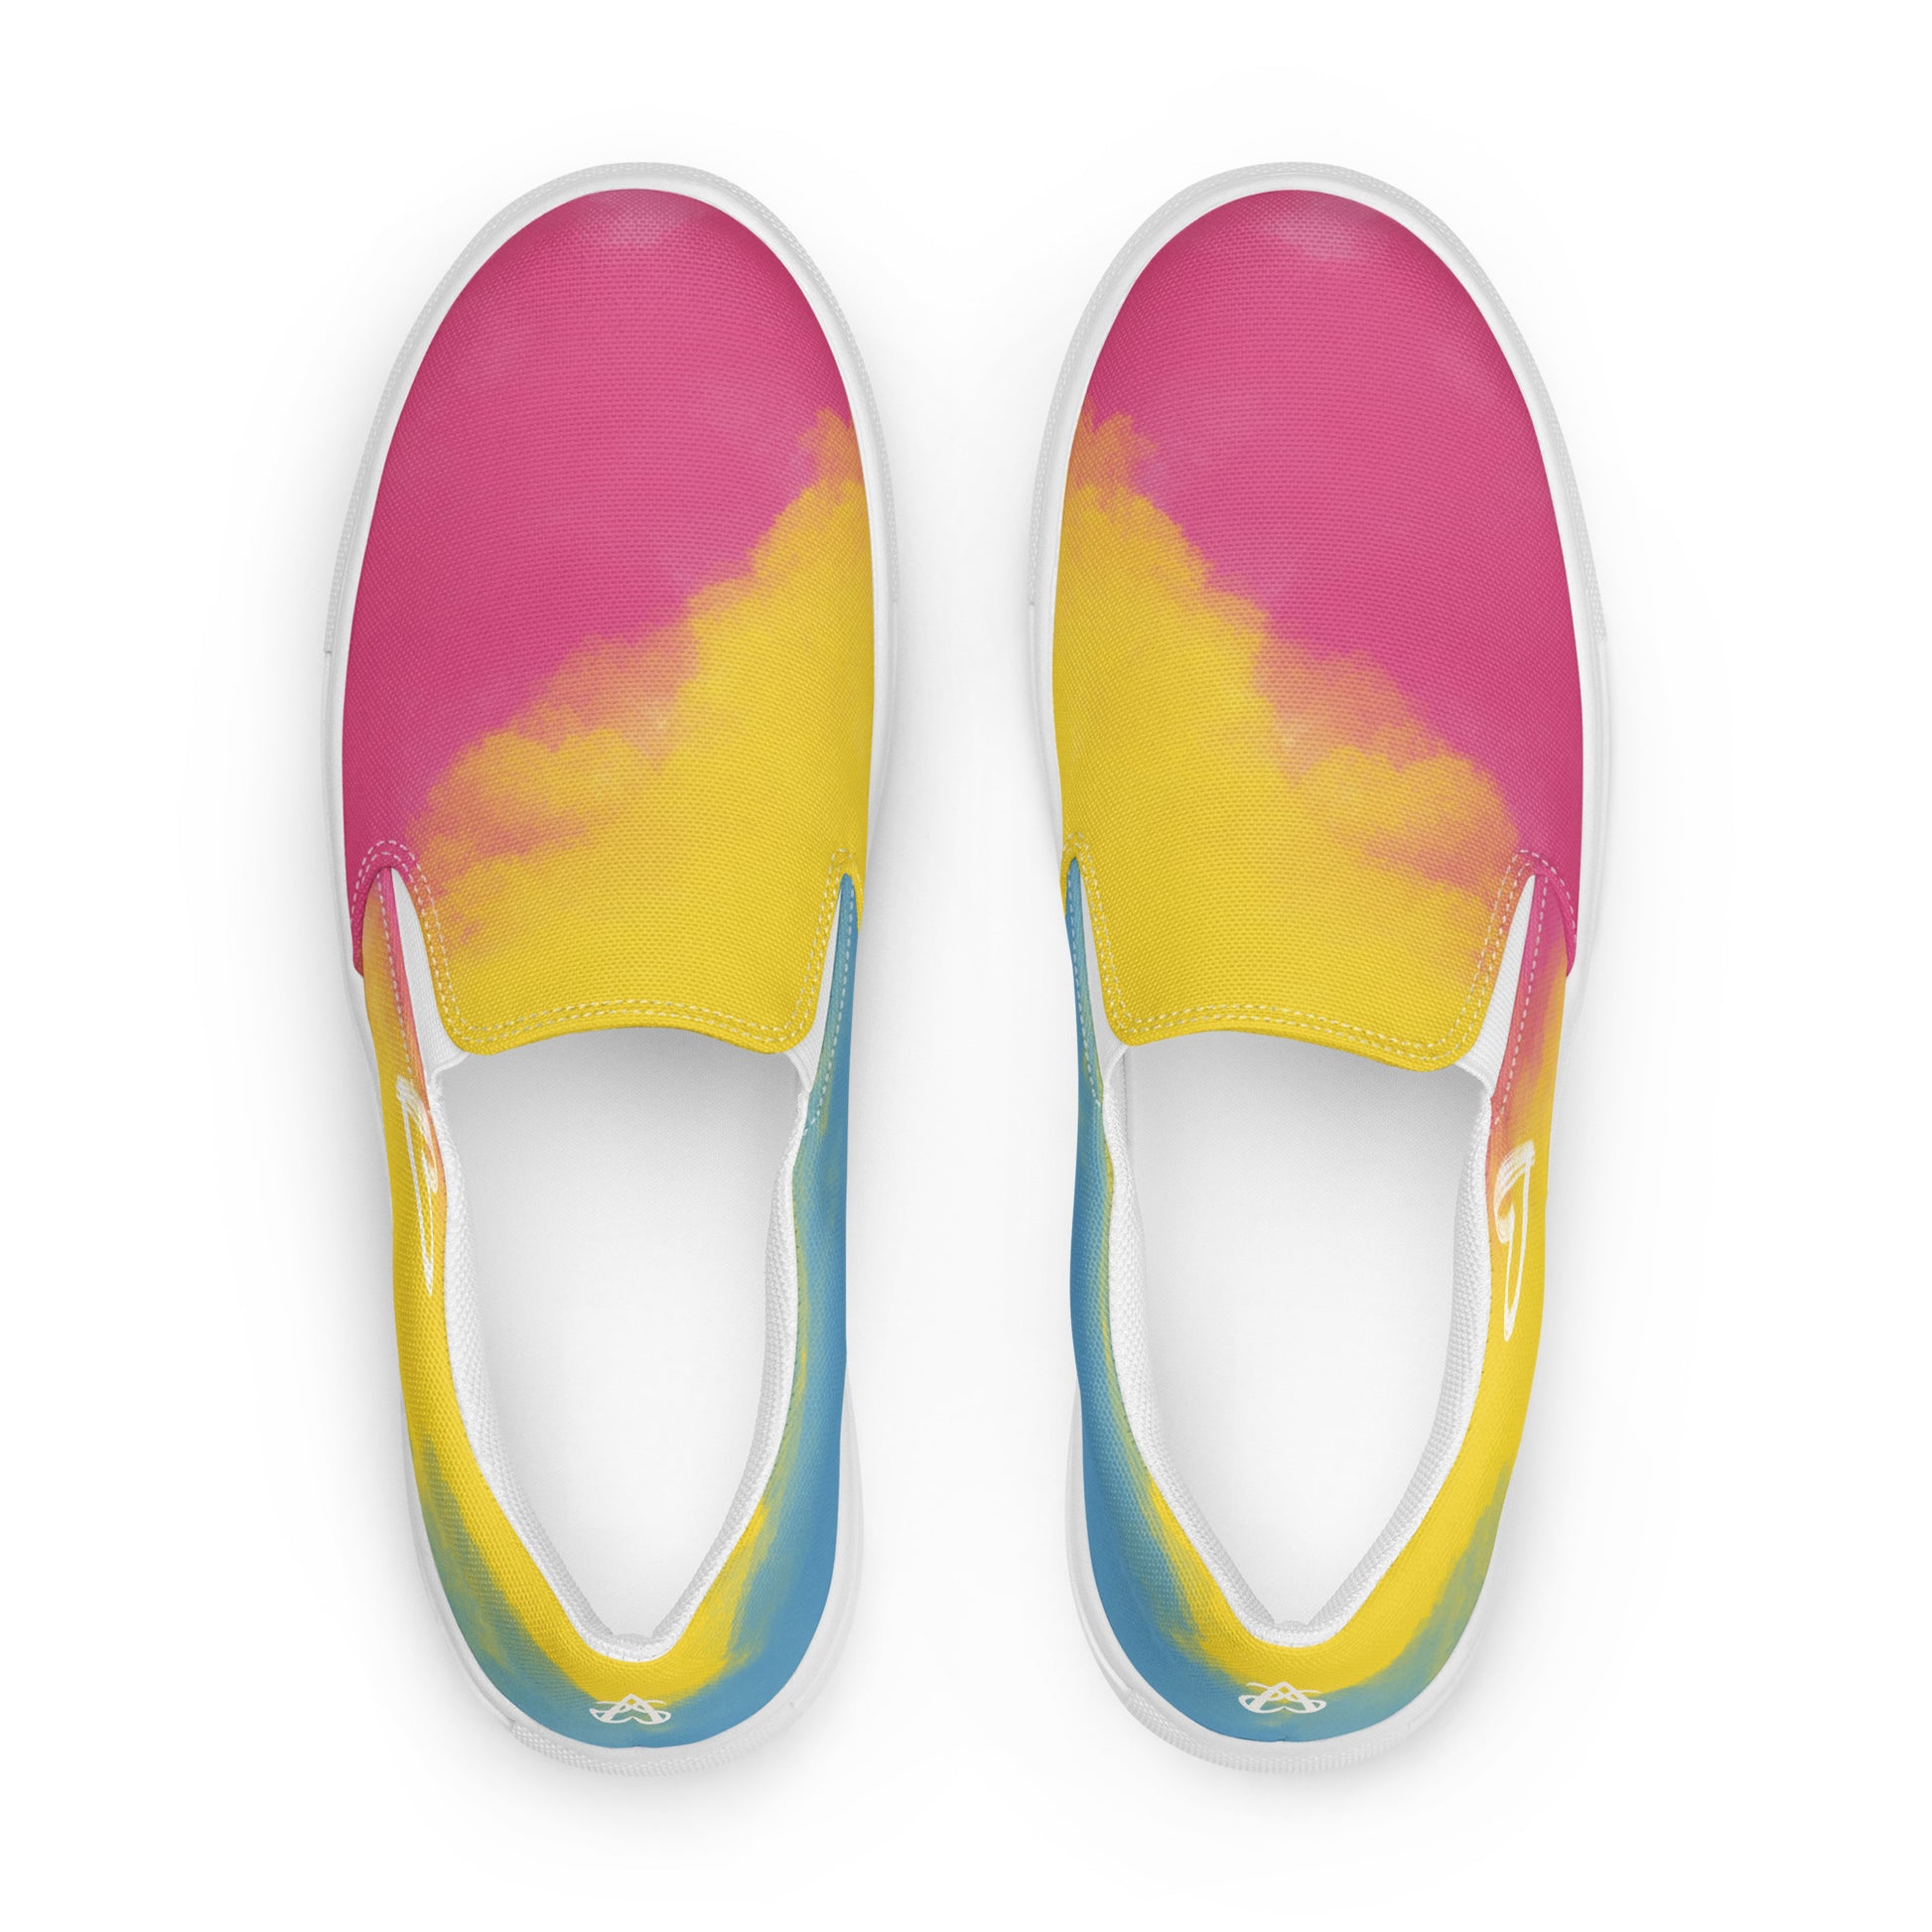 Top view: A pair of slip on shoes with color block pink, yellow, and blue clouds, a white hand drawn heart, and the Aras Sivad logo on the back.